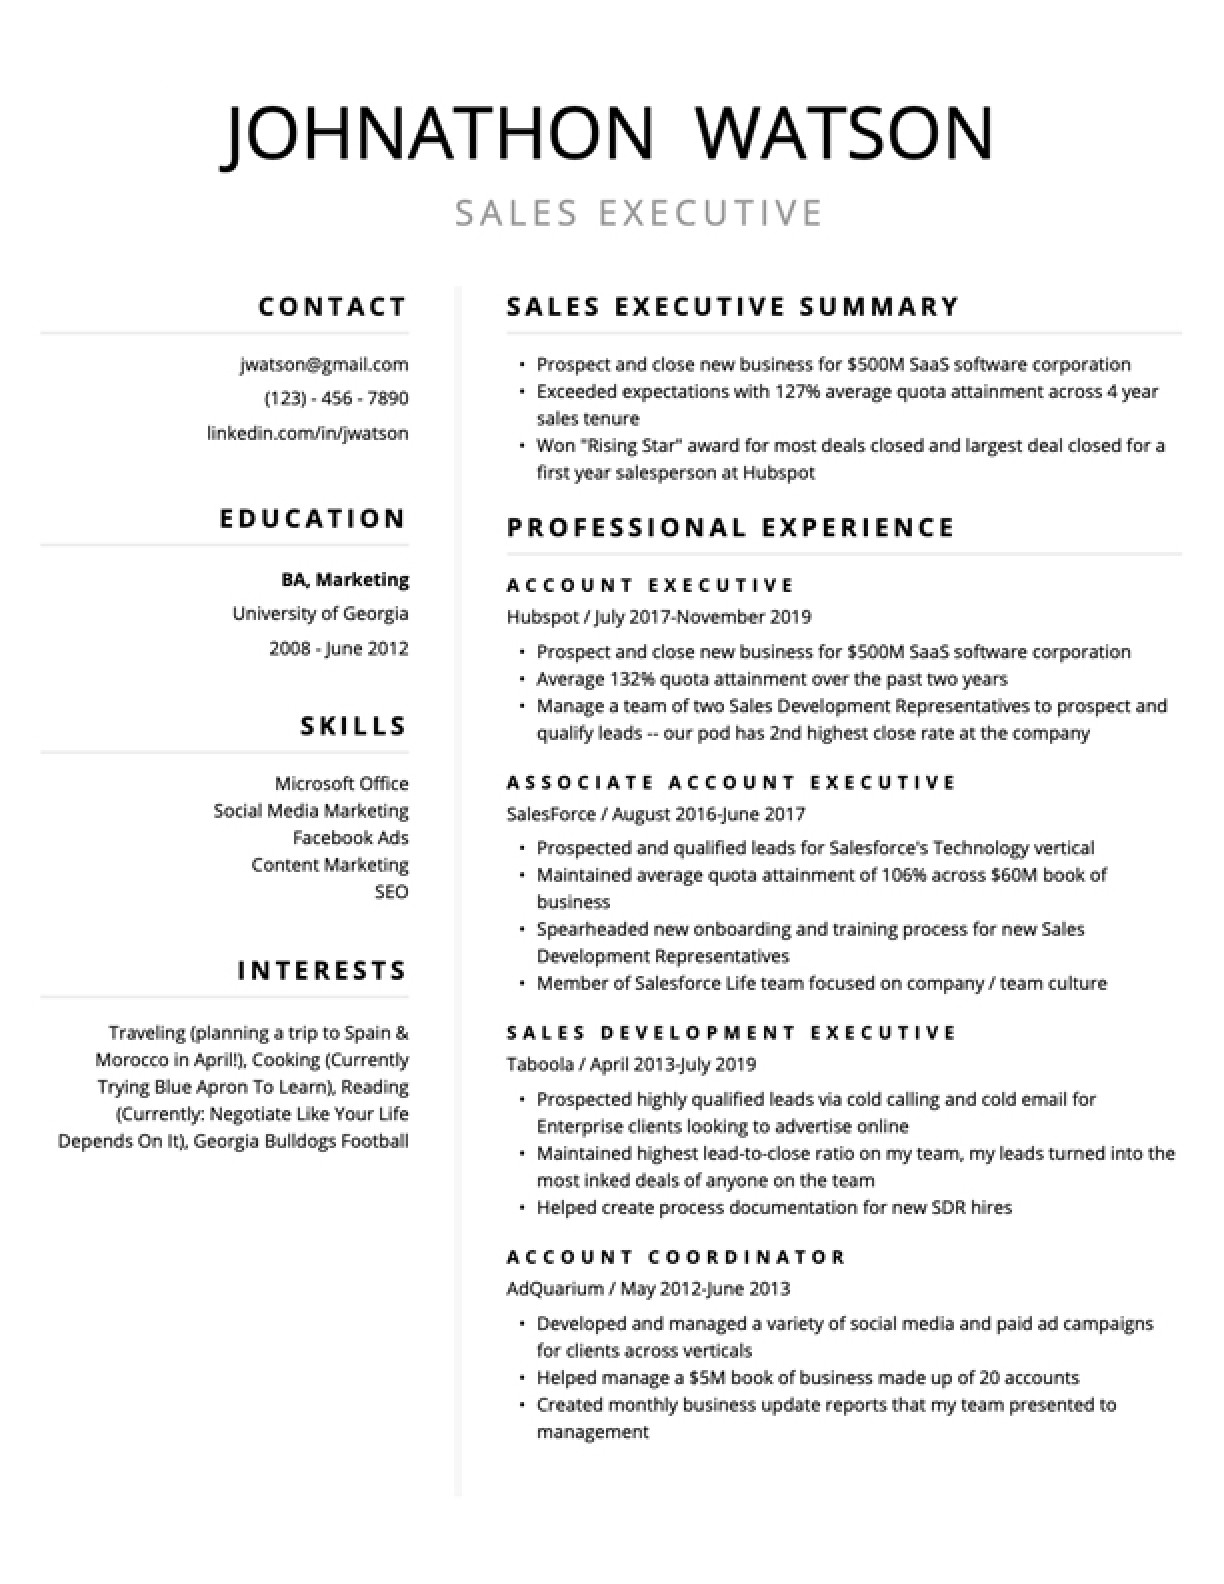 Resume Template for someone who Has Never Had A Job Free Resume Templates for 2021 (edit & Download) Resybuild.io